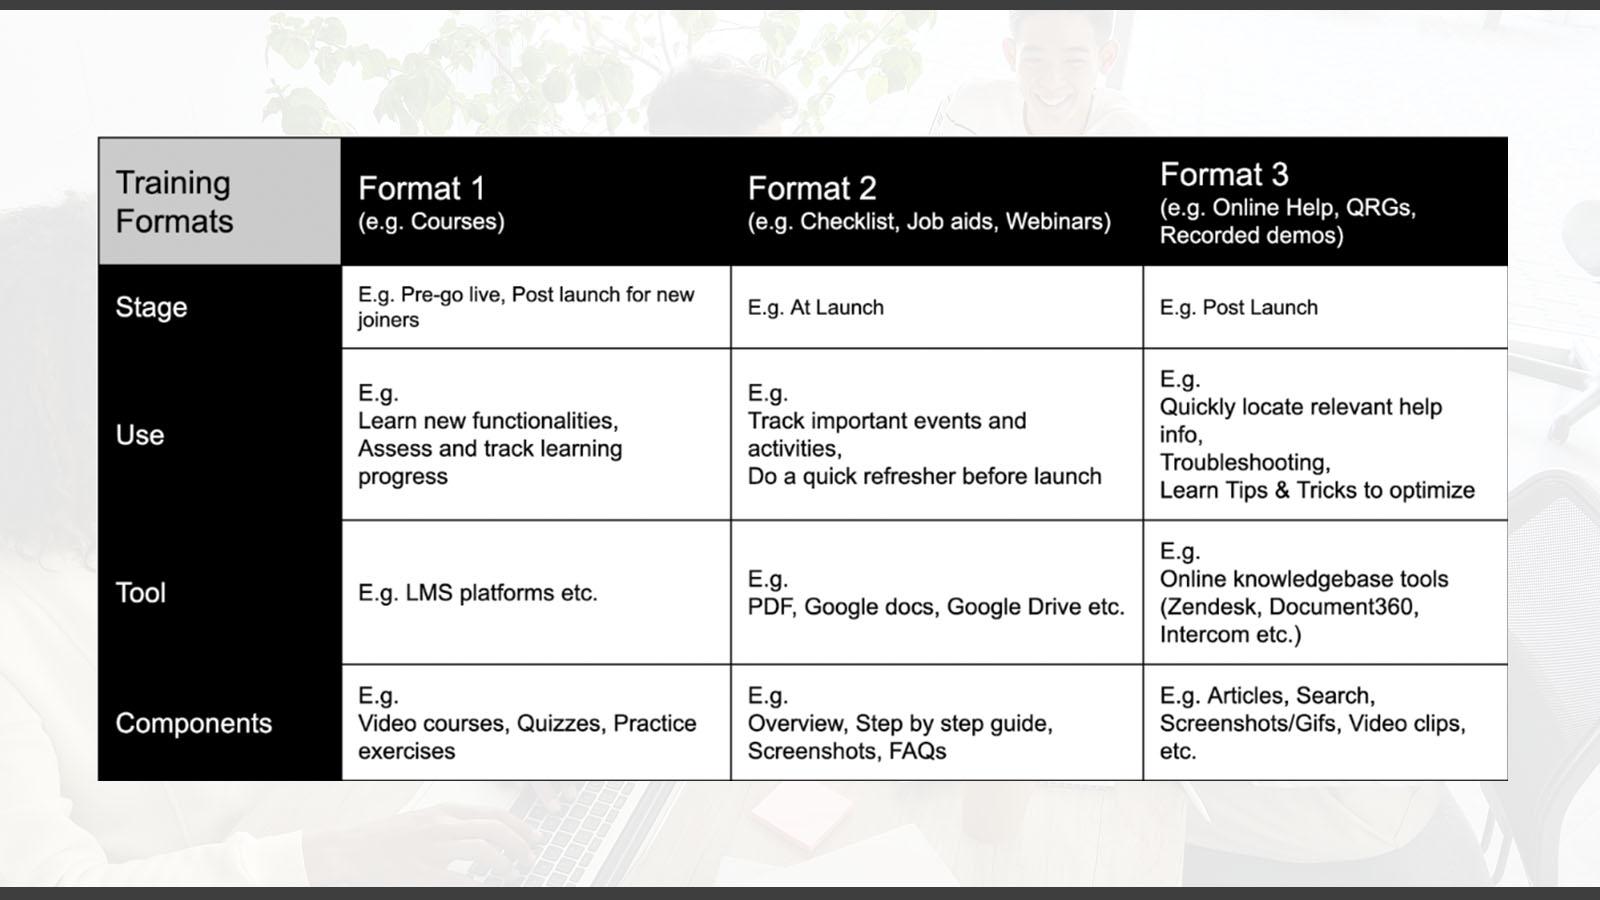 Training Formats Canvas builds from the Training Journey Needs Matrix and establishes how each product documentation format will play its part in covering the user needs at each training stage.